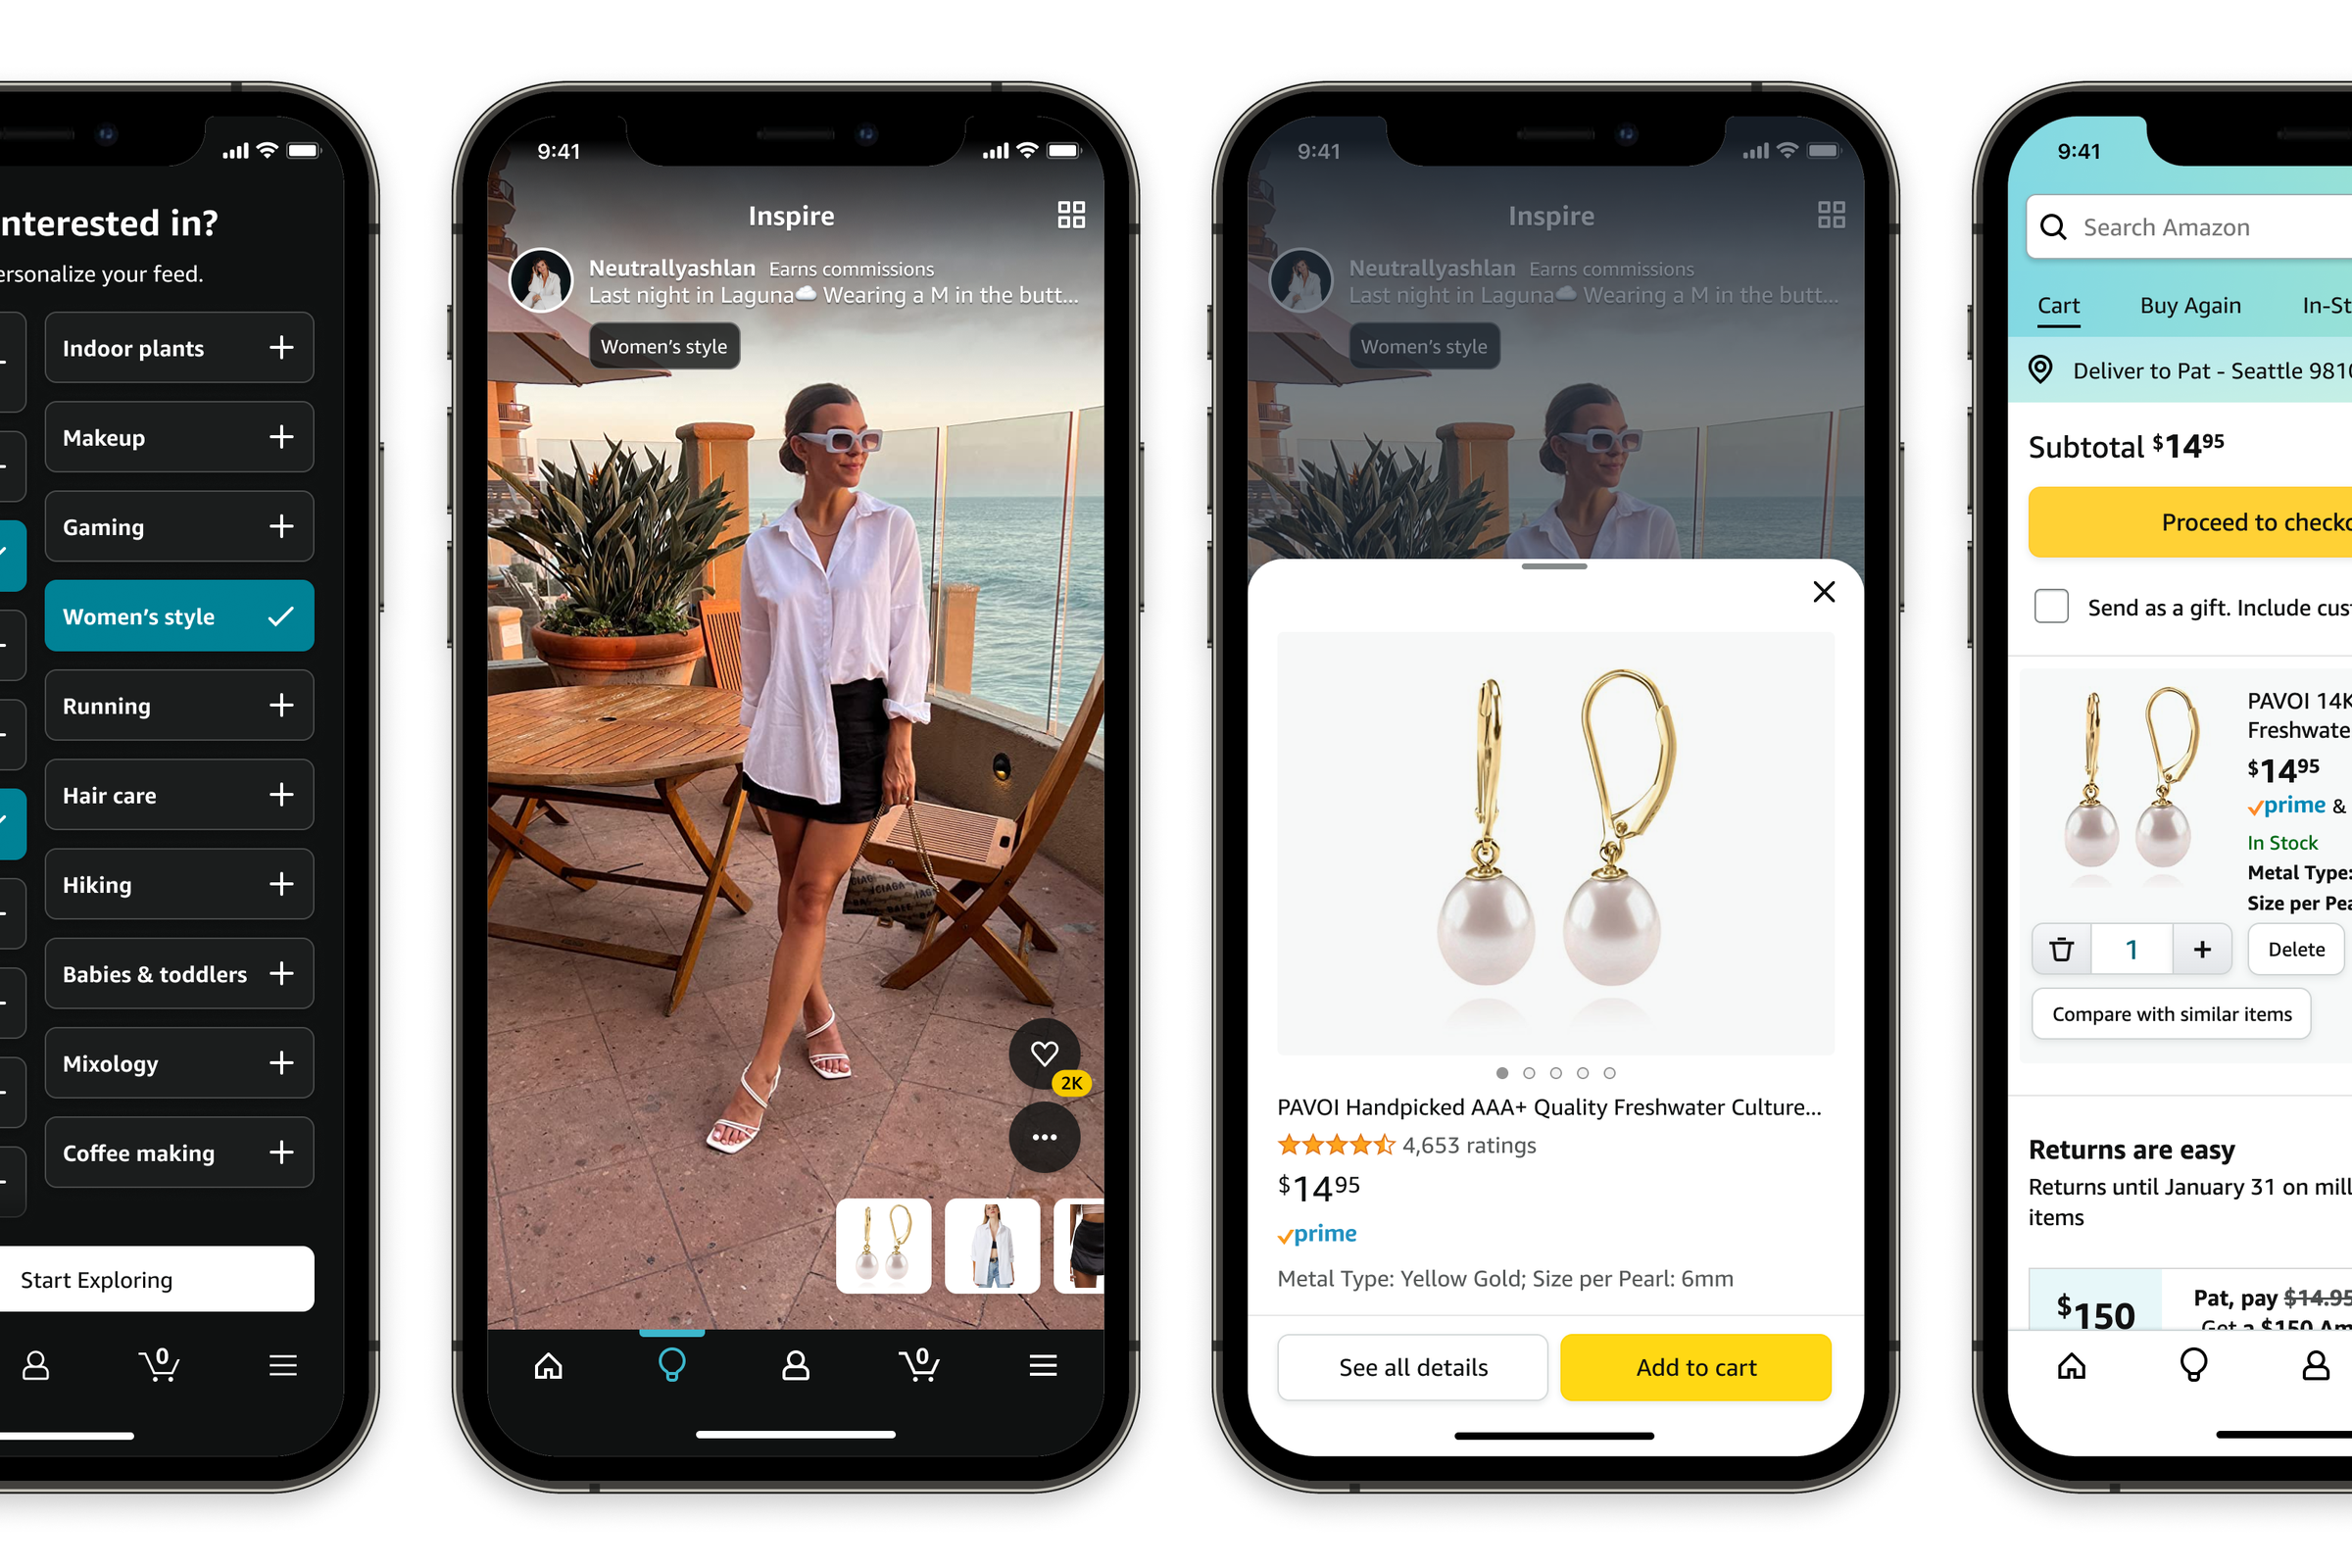 Four phone screens showing how the Amazon feed will work. Users can click topics/categories they’re interested in, scroll a feed of pictures and images, and make purchases directly.